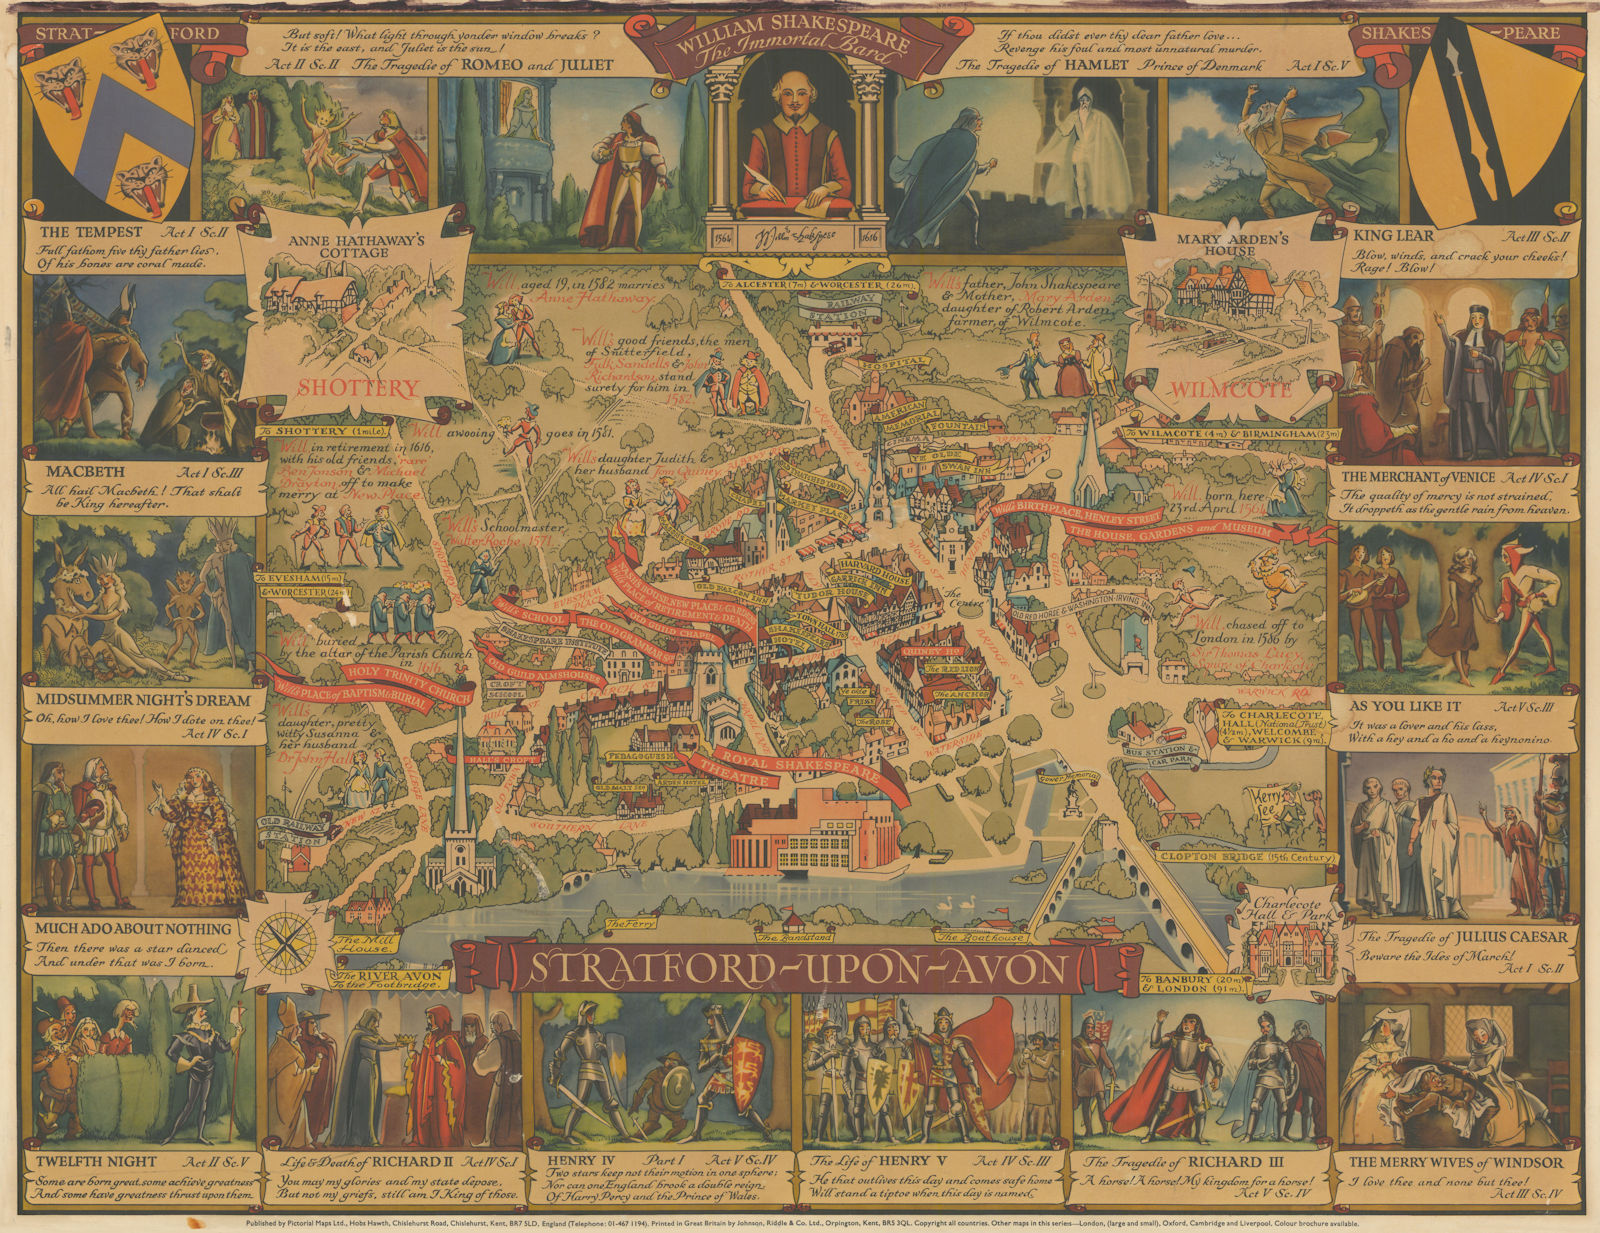 Stratford-upon-Avon & William Shakespeare's life. Kerry Lee pictorial map c1965